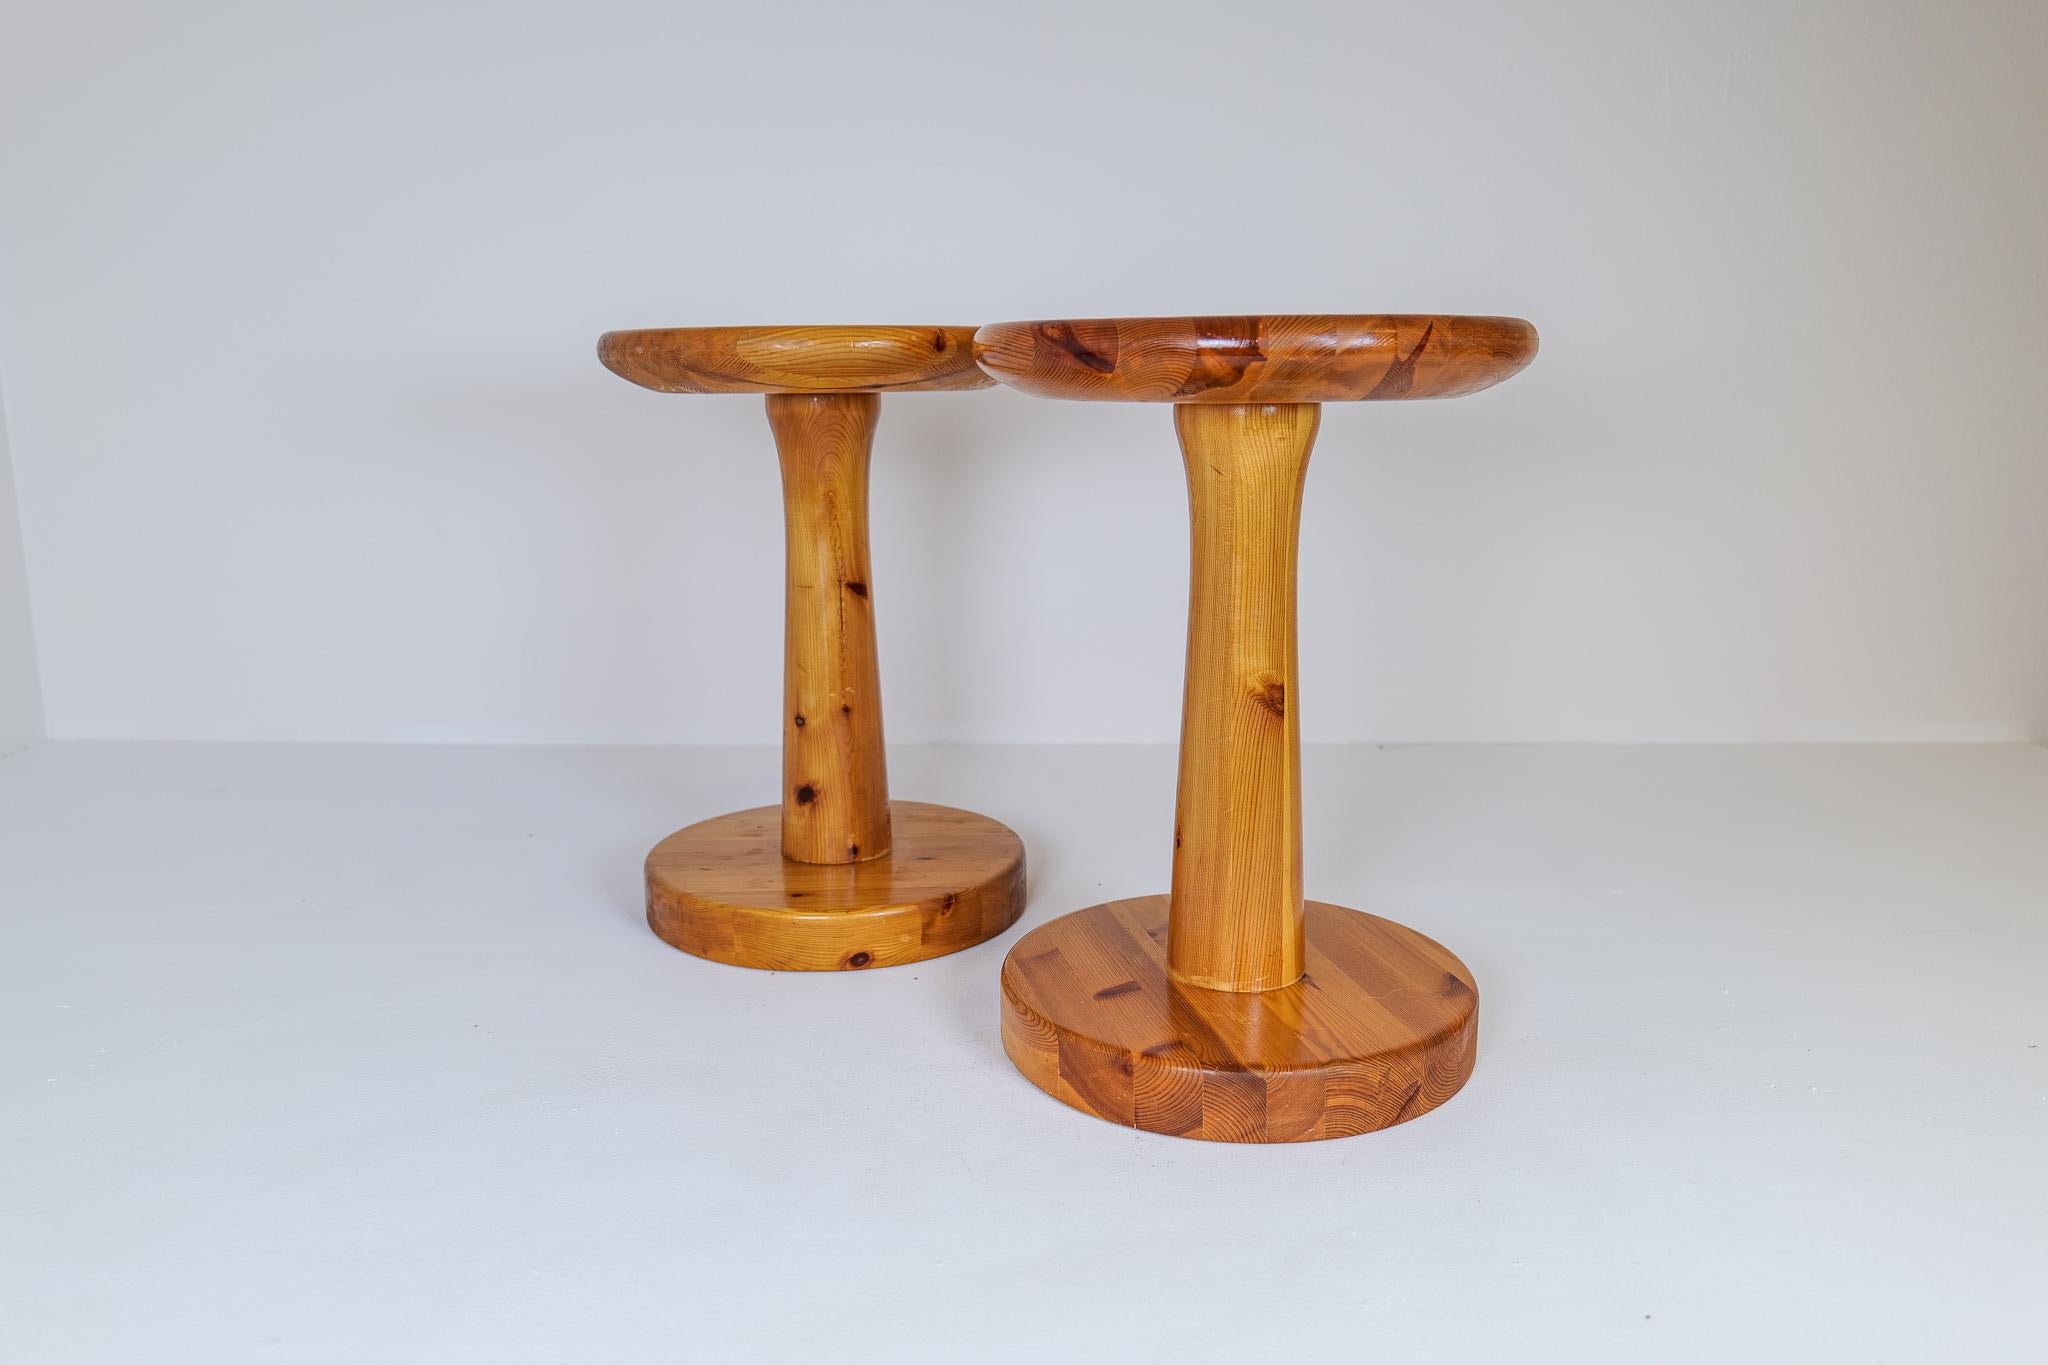 Scandinavian modern pair of stools in pine made in Sweden during the 1970s
These stools are a good example of good craftsmanship with minimalistic stile known to Scandinavian furniture. Wonderful, lacquered patterned pine. Works as stool or a small